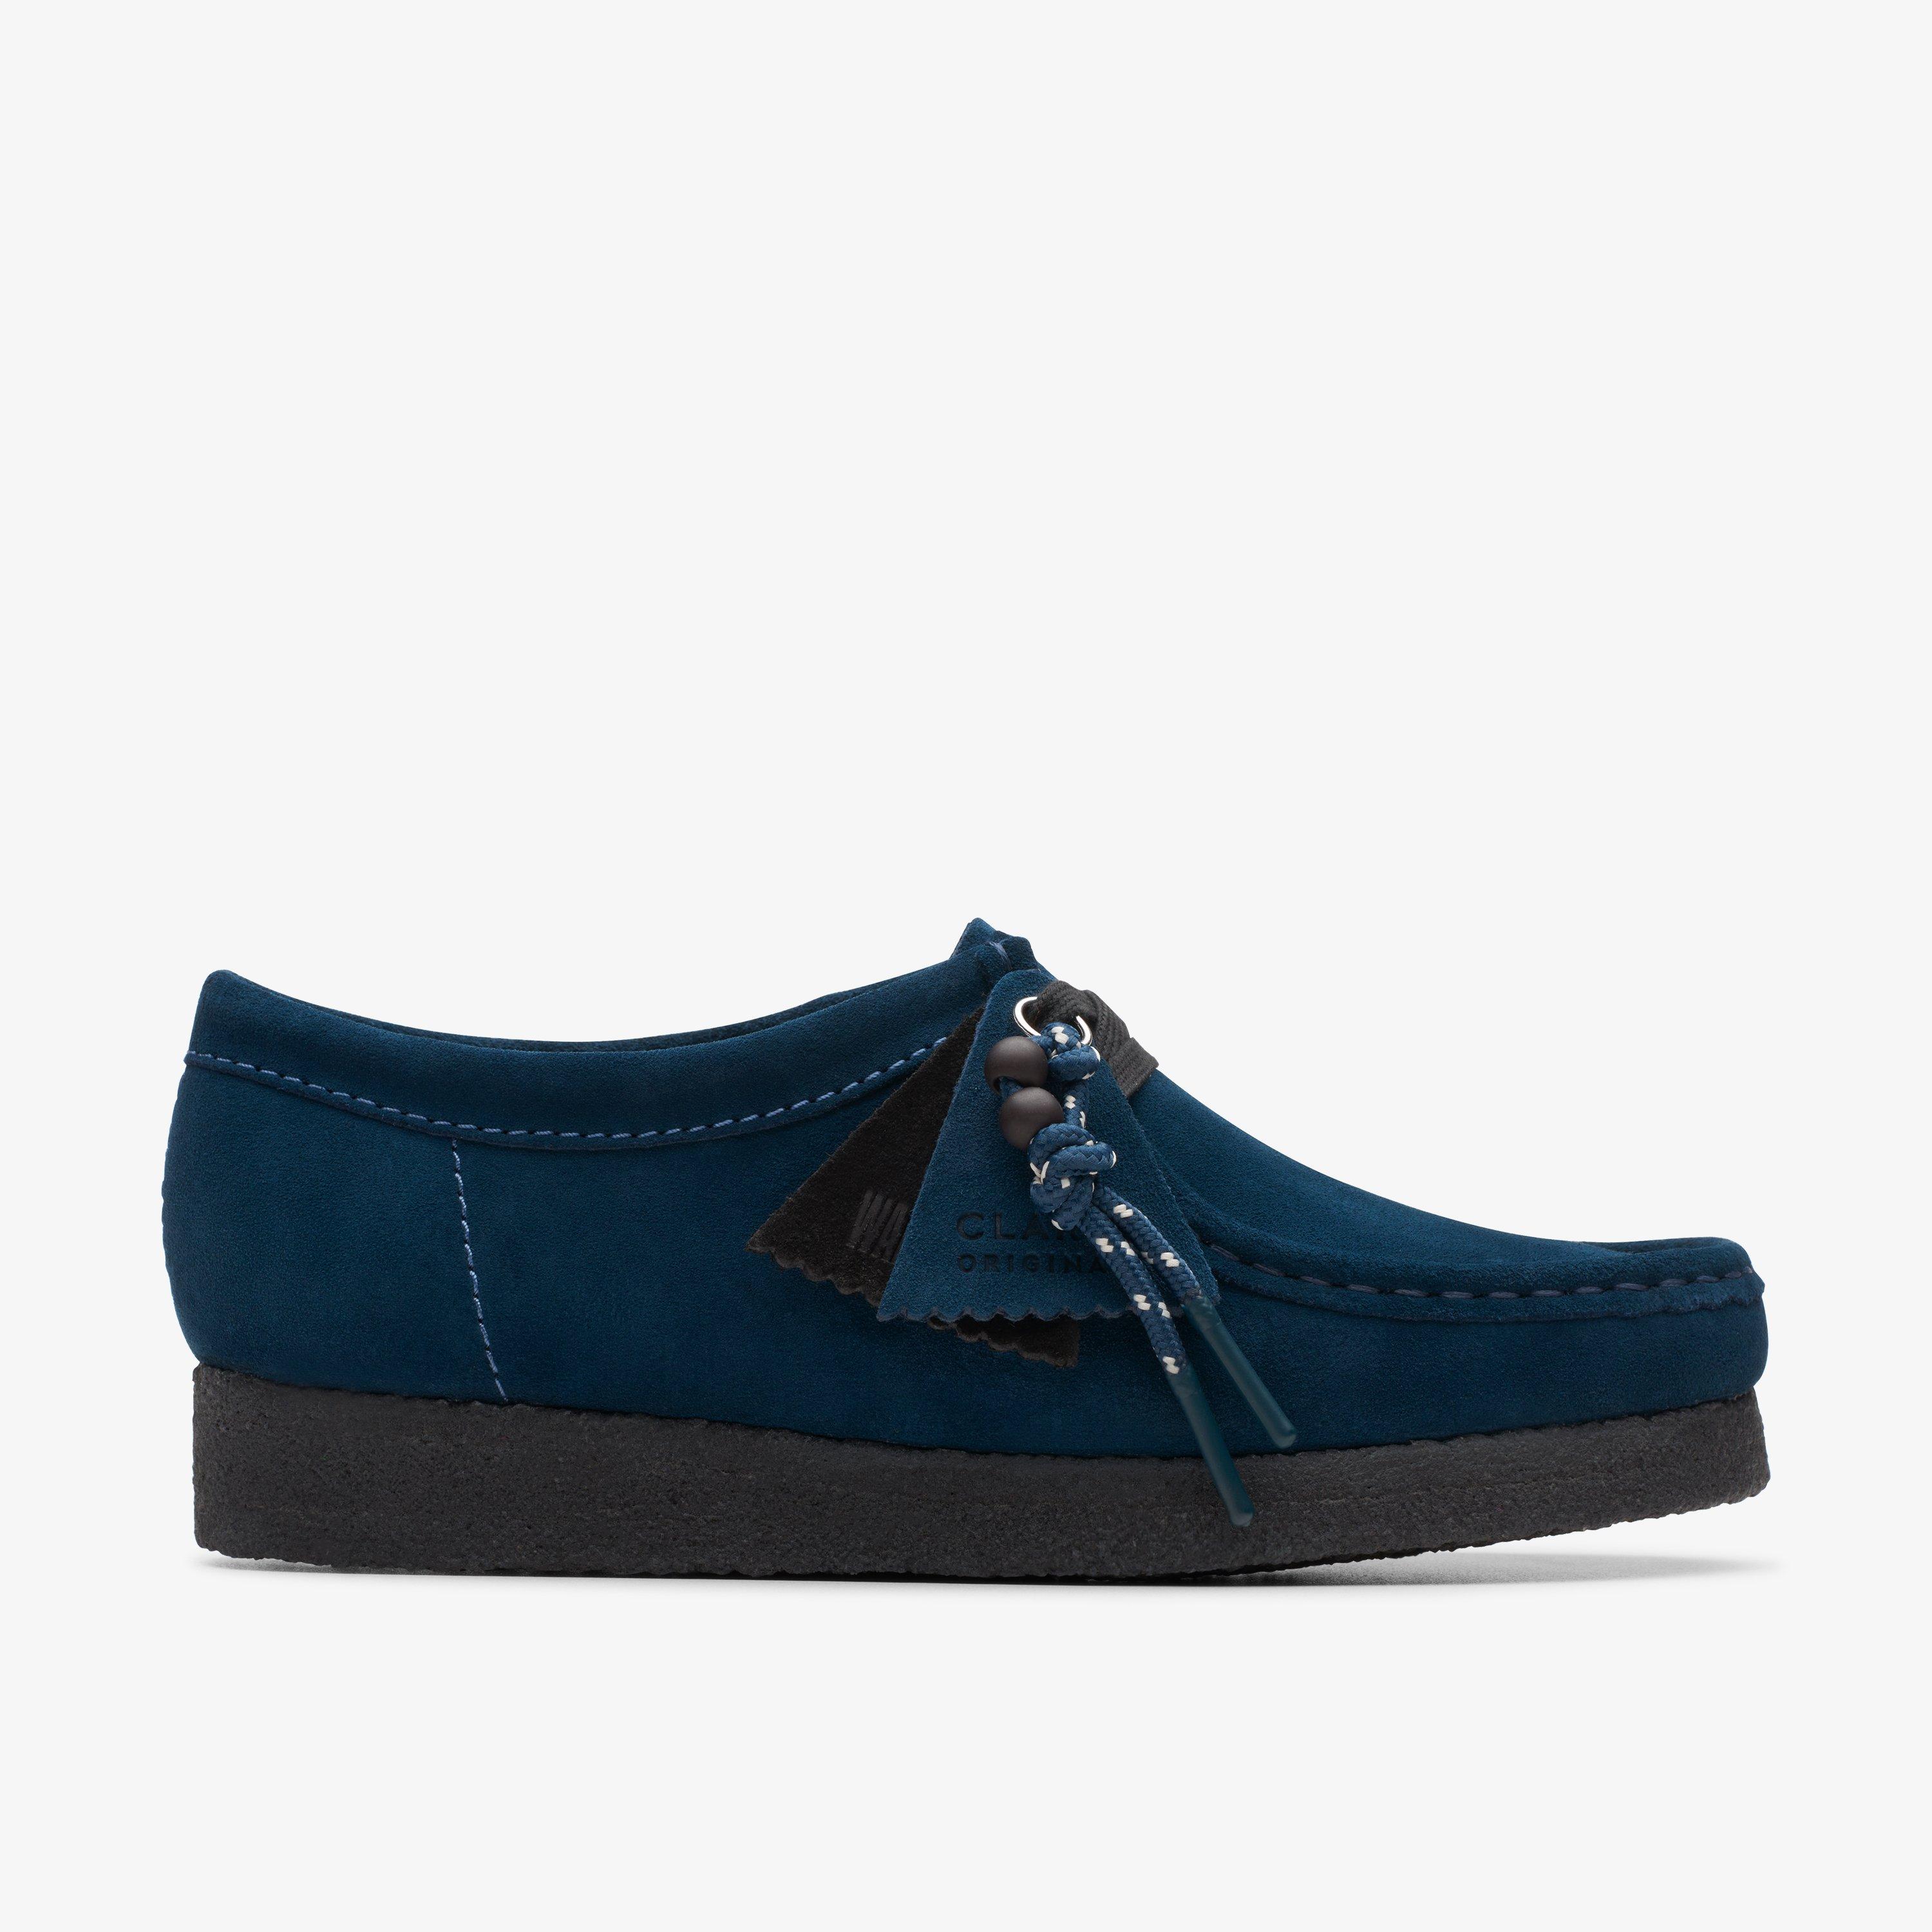 WOMENS Wallabee Deep Blue Suede Shoes | Clarks US